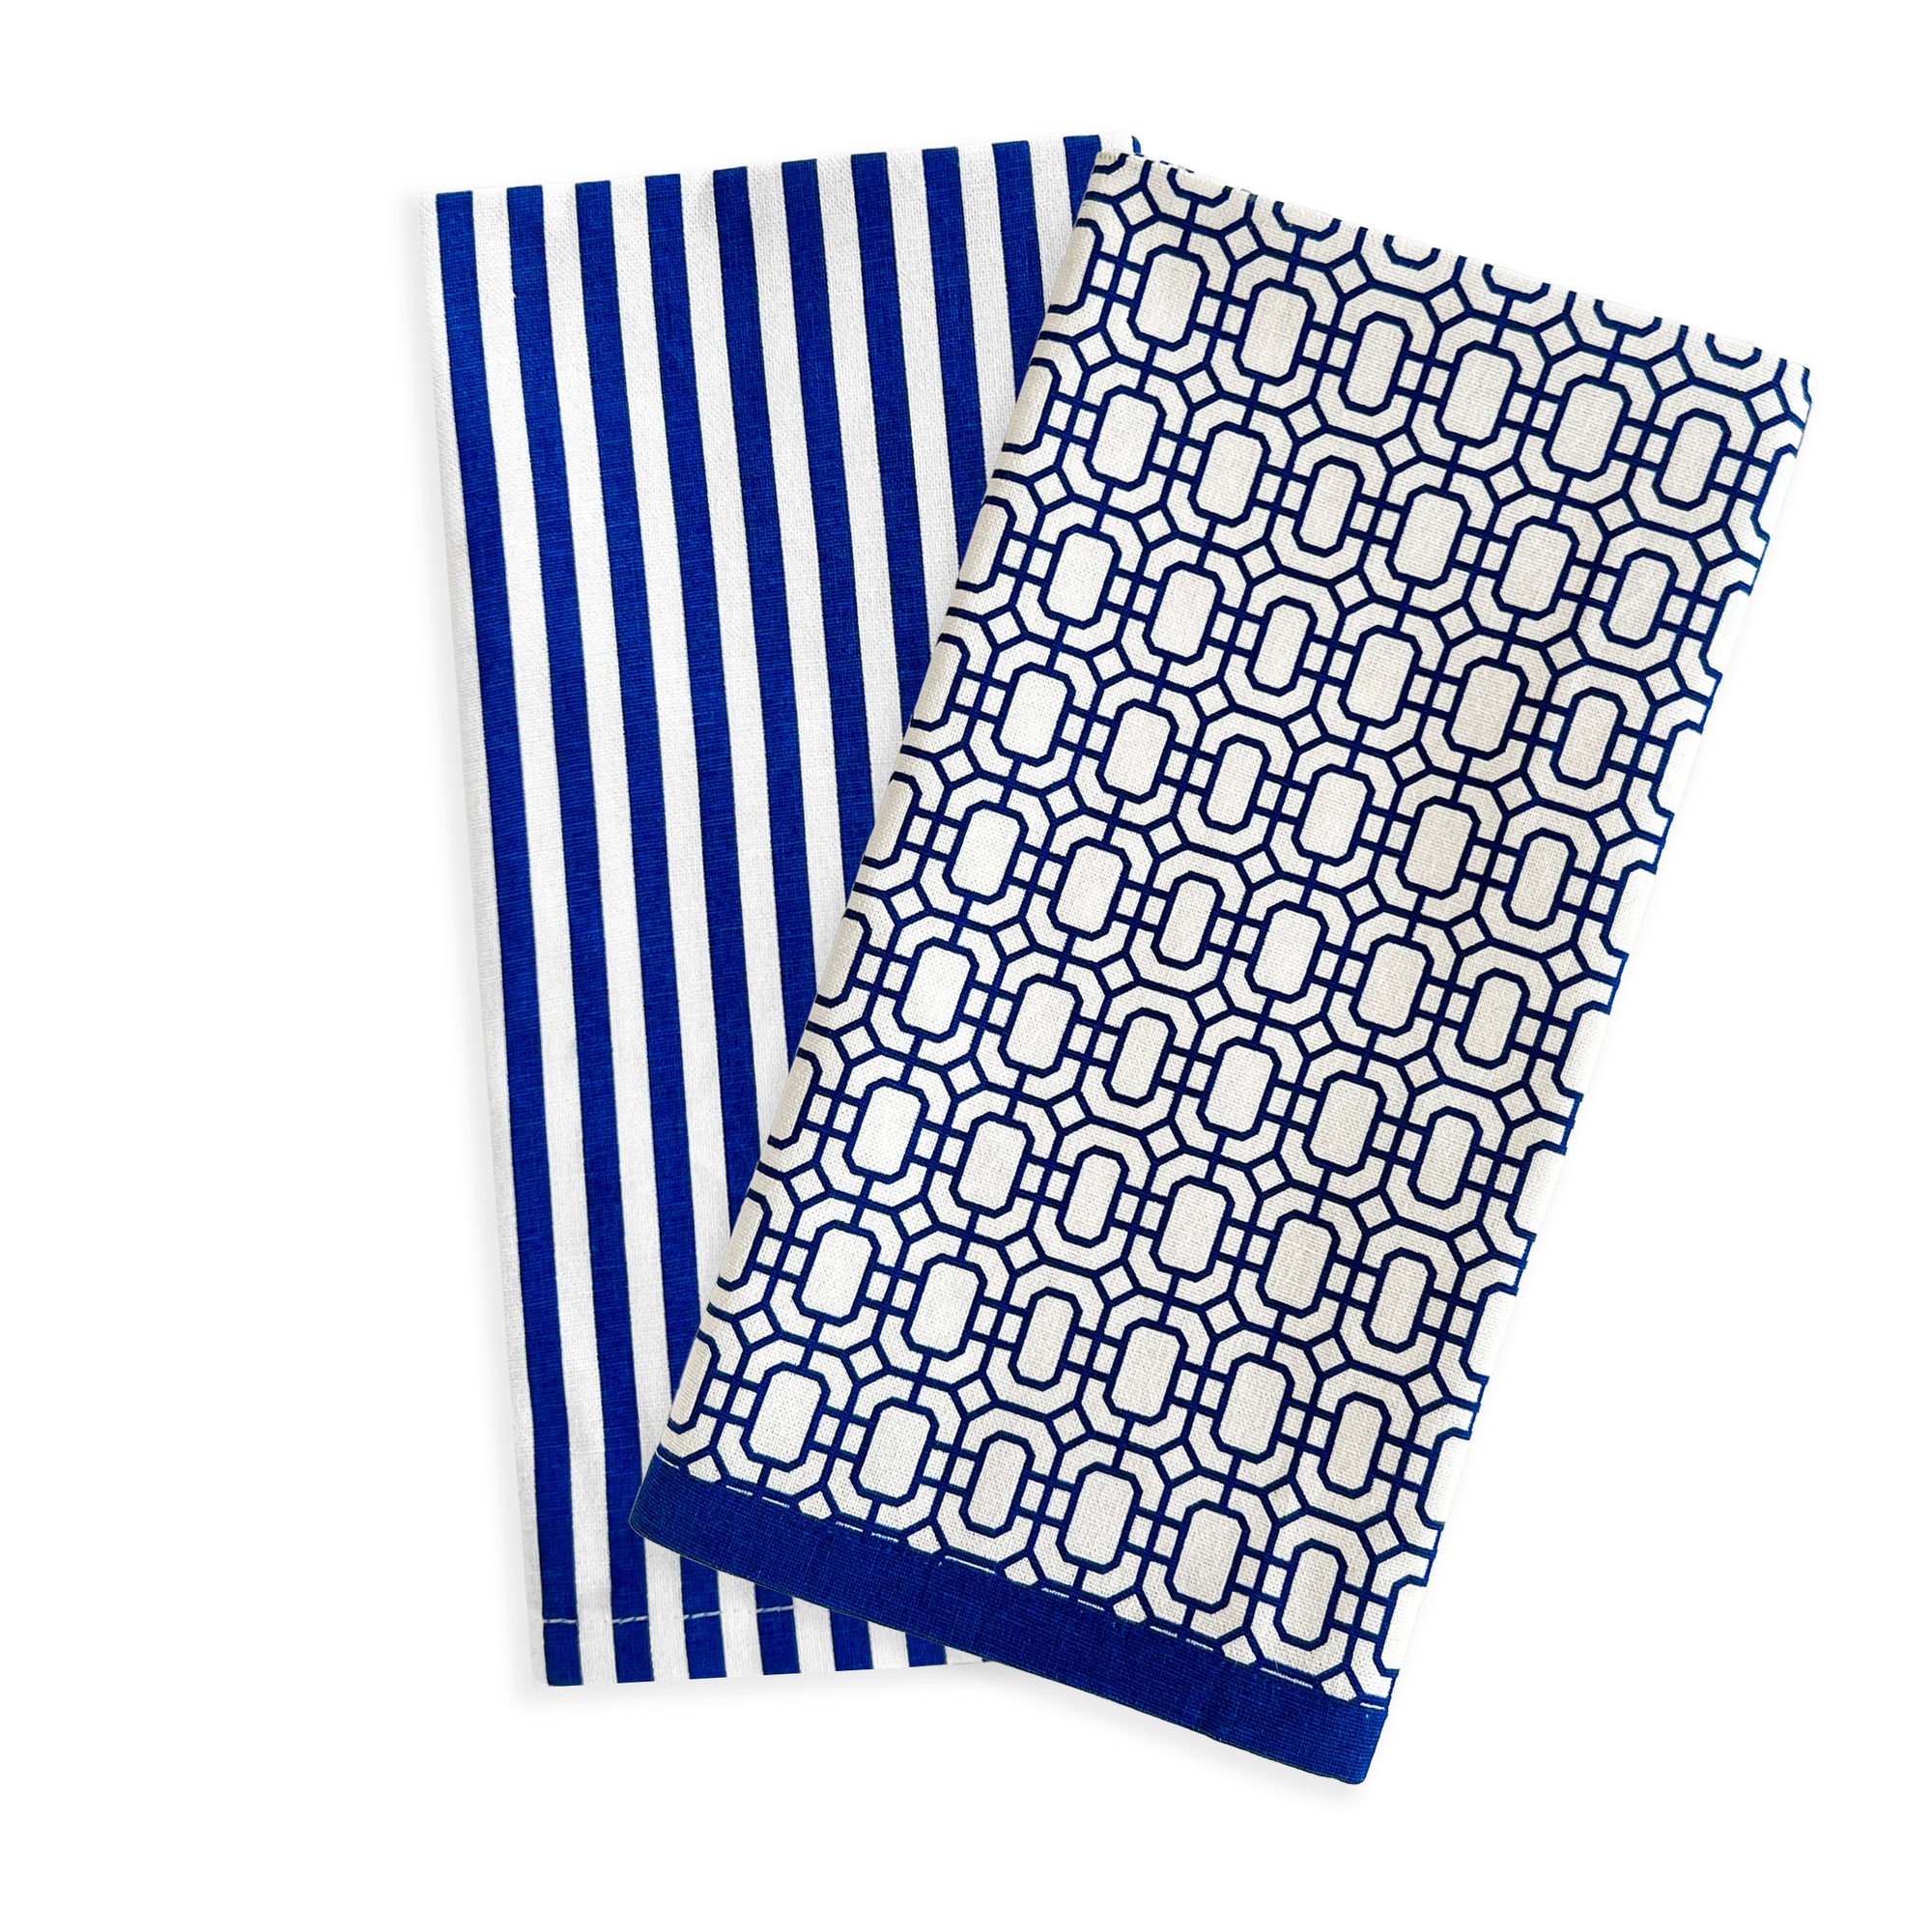 Newport Garden Gate and Pinstripe in Blue Kitchen Towels Sold as a Set/2 in 100% Cotton from Caskata